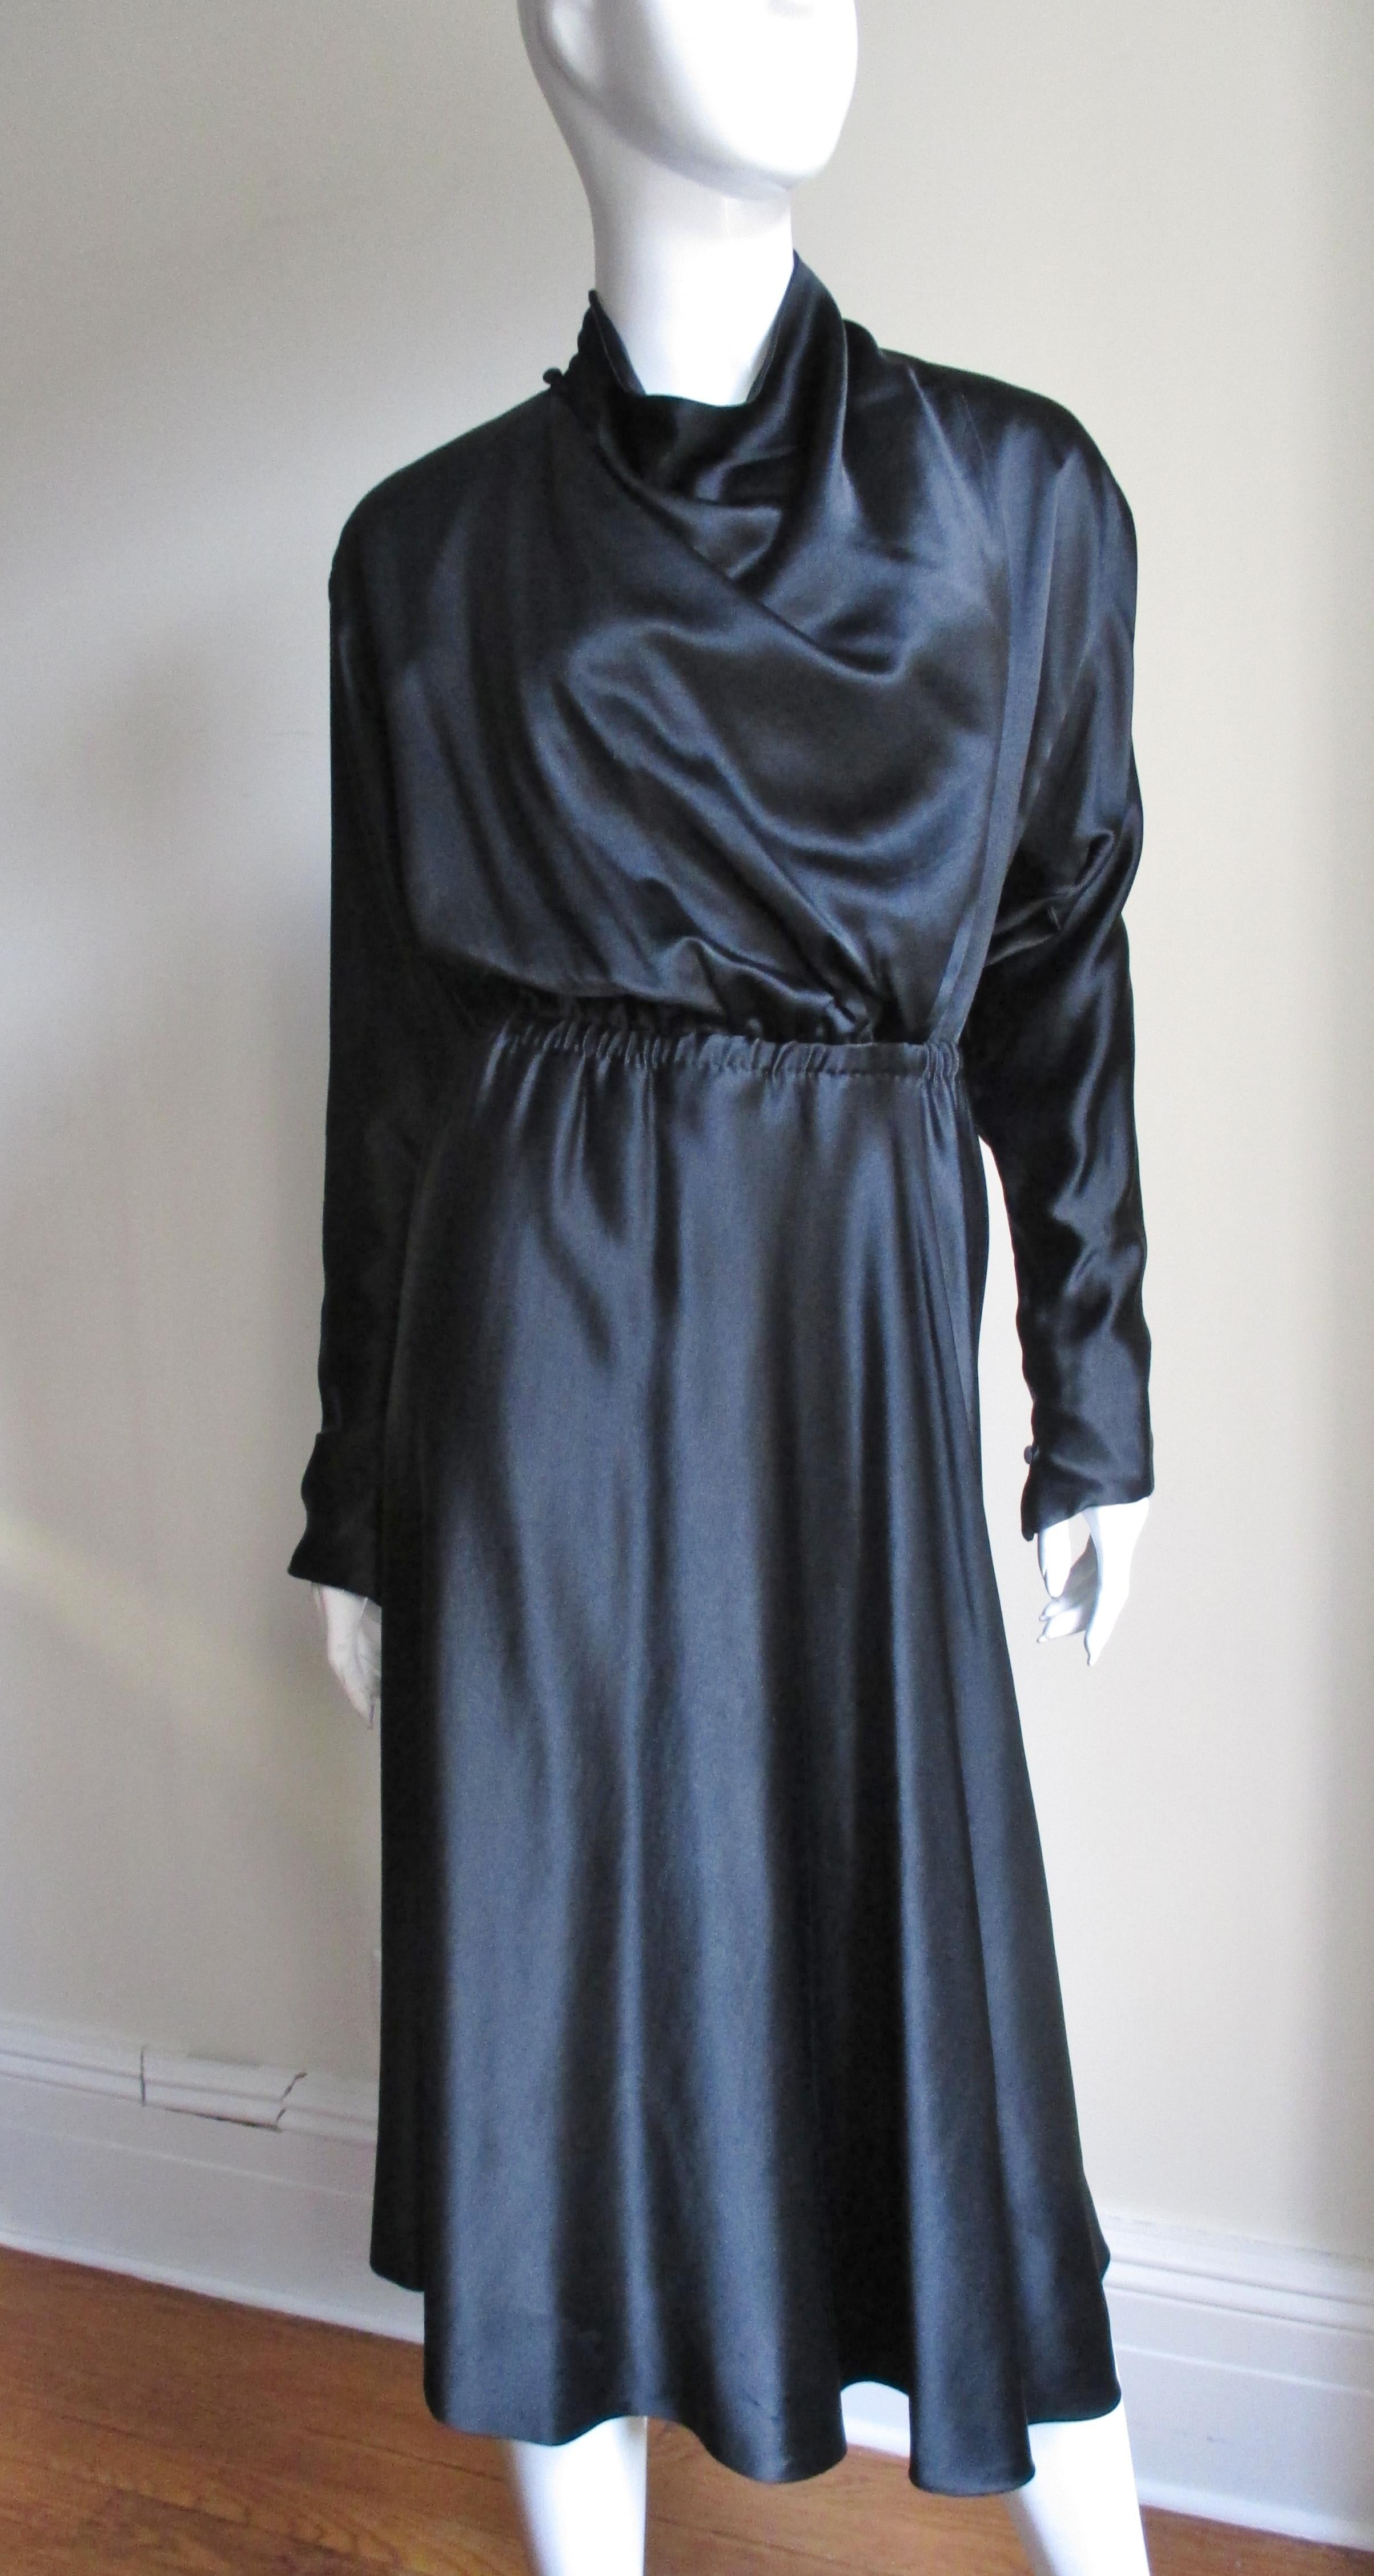 Halston 1970s Silk Wrap Dress In Excellent Condition For Sale In Water Mill, NY